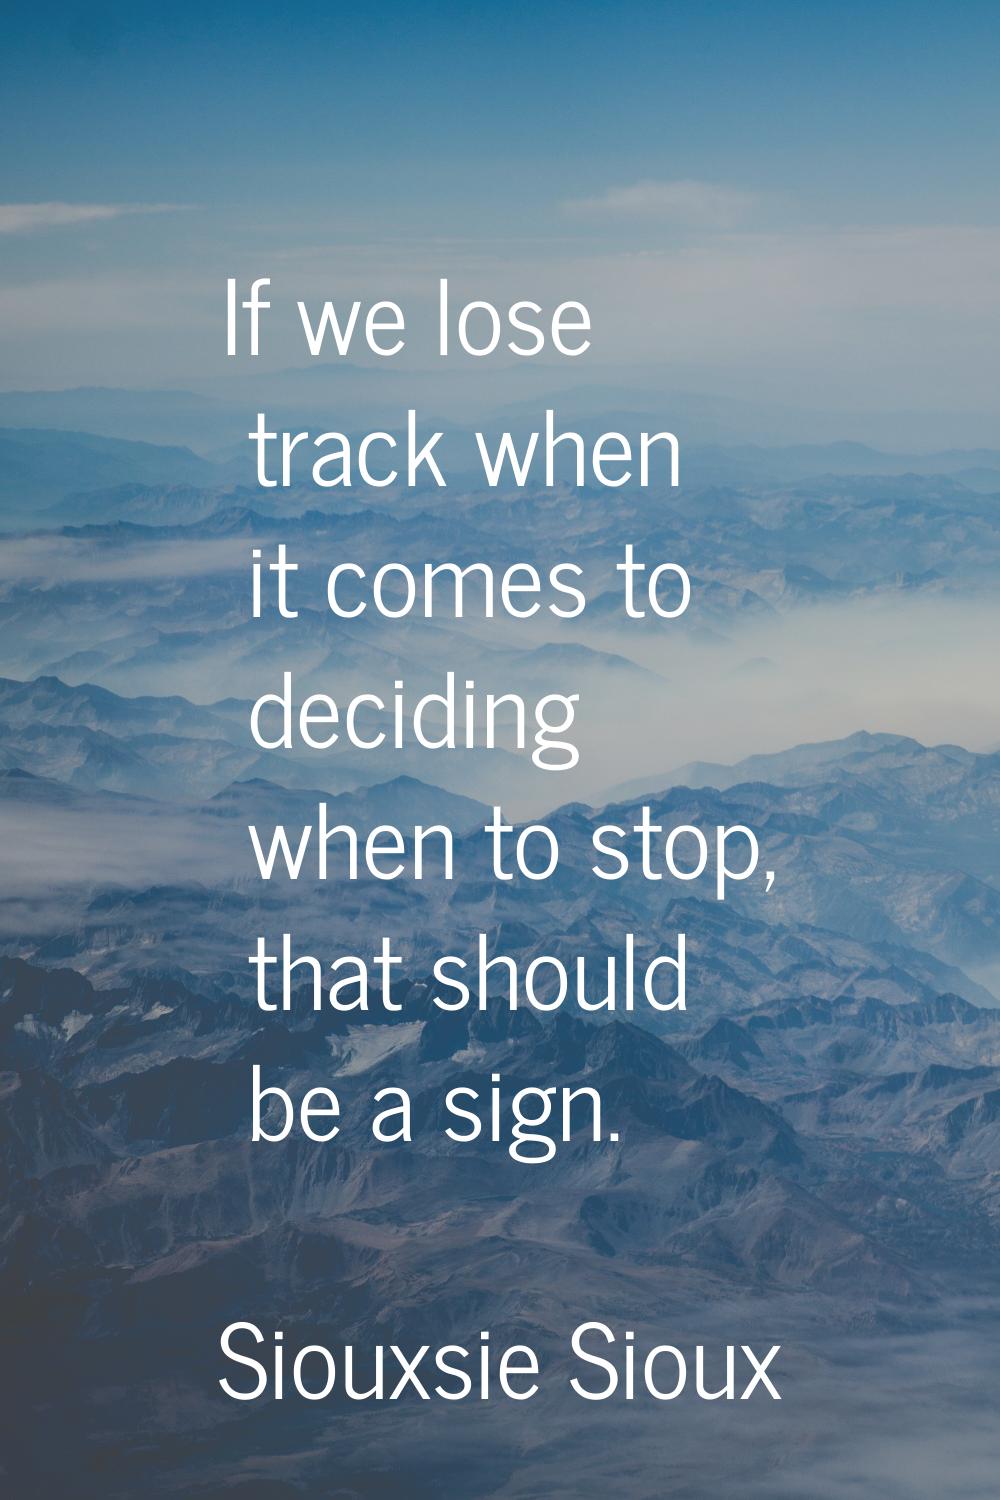 If we lose track when it comes to deciding when to stop, that should be a sign.